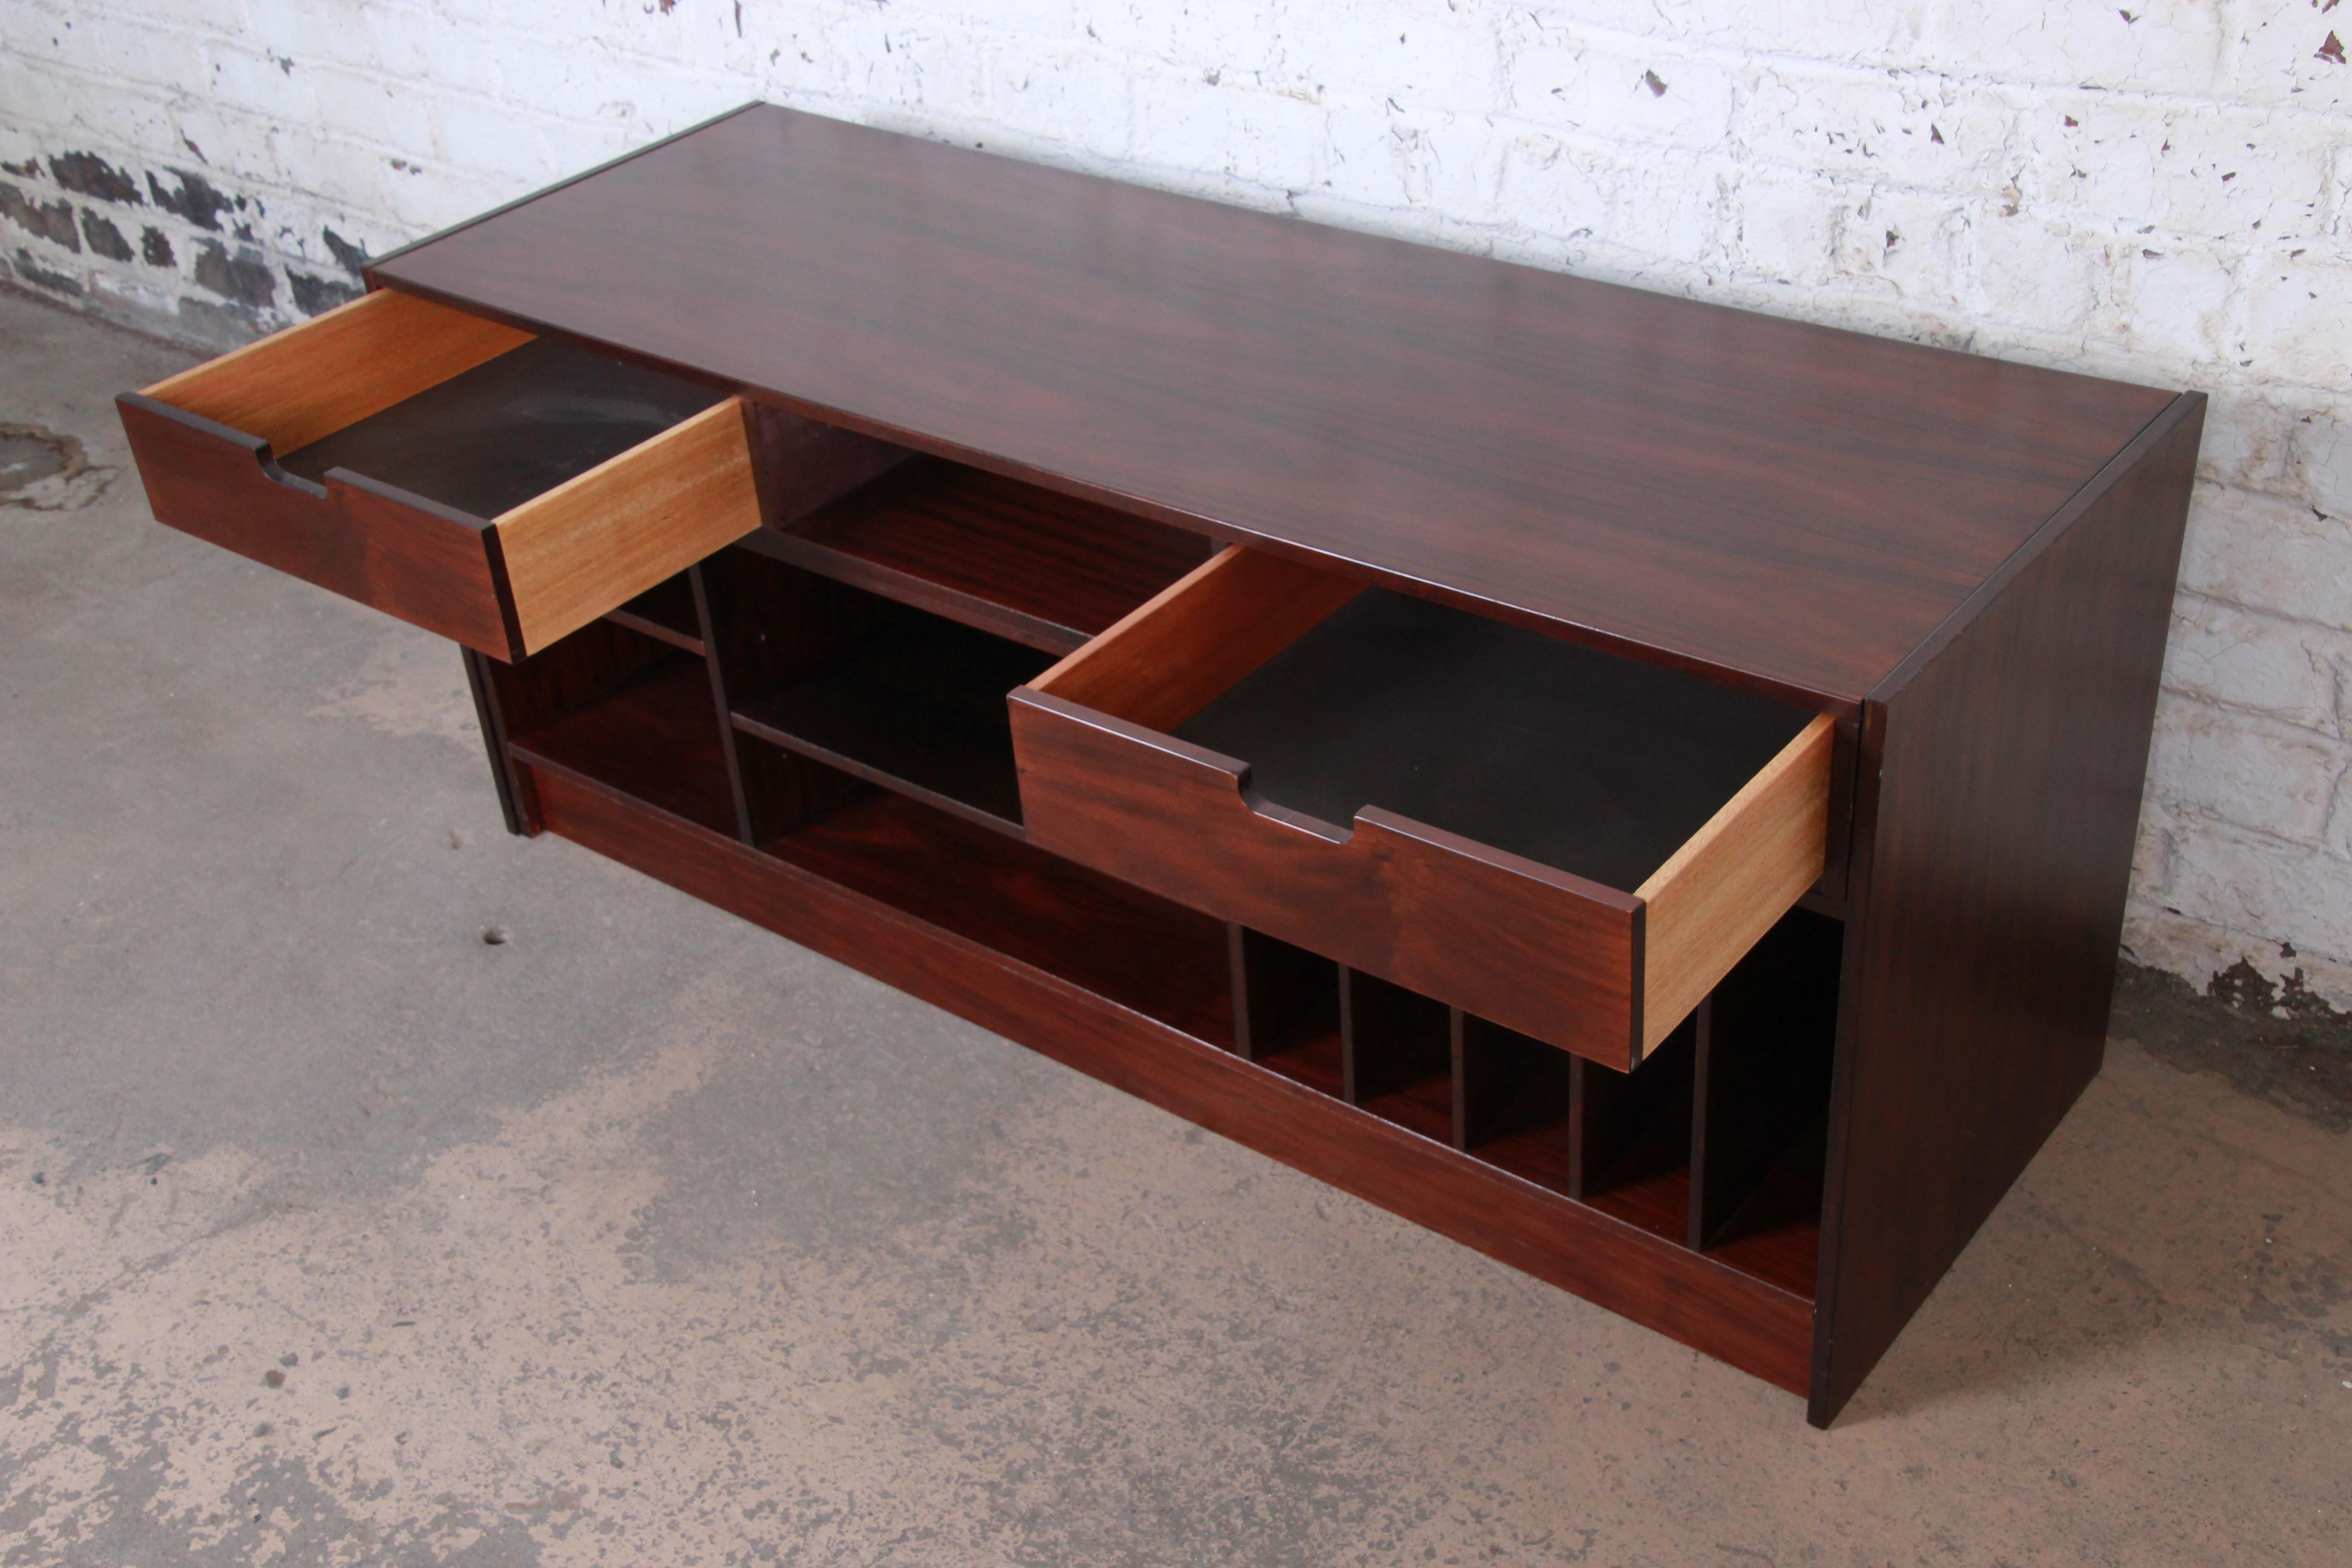 Late 20th Century Danish Modern Rosewood Extending Credenza or Media Cabinet